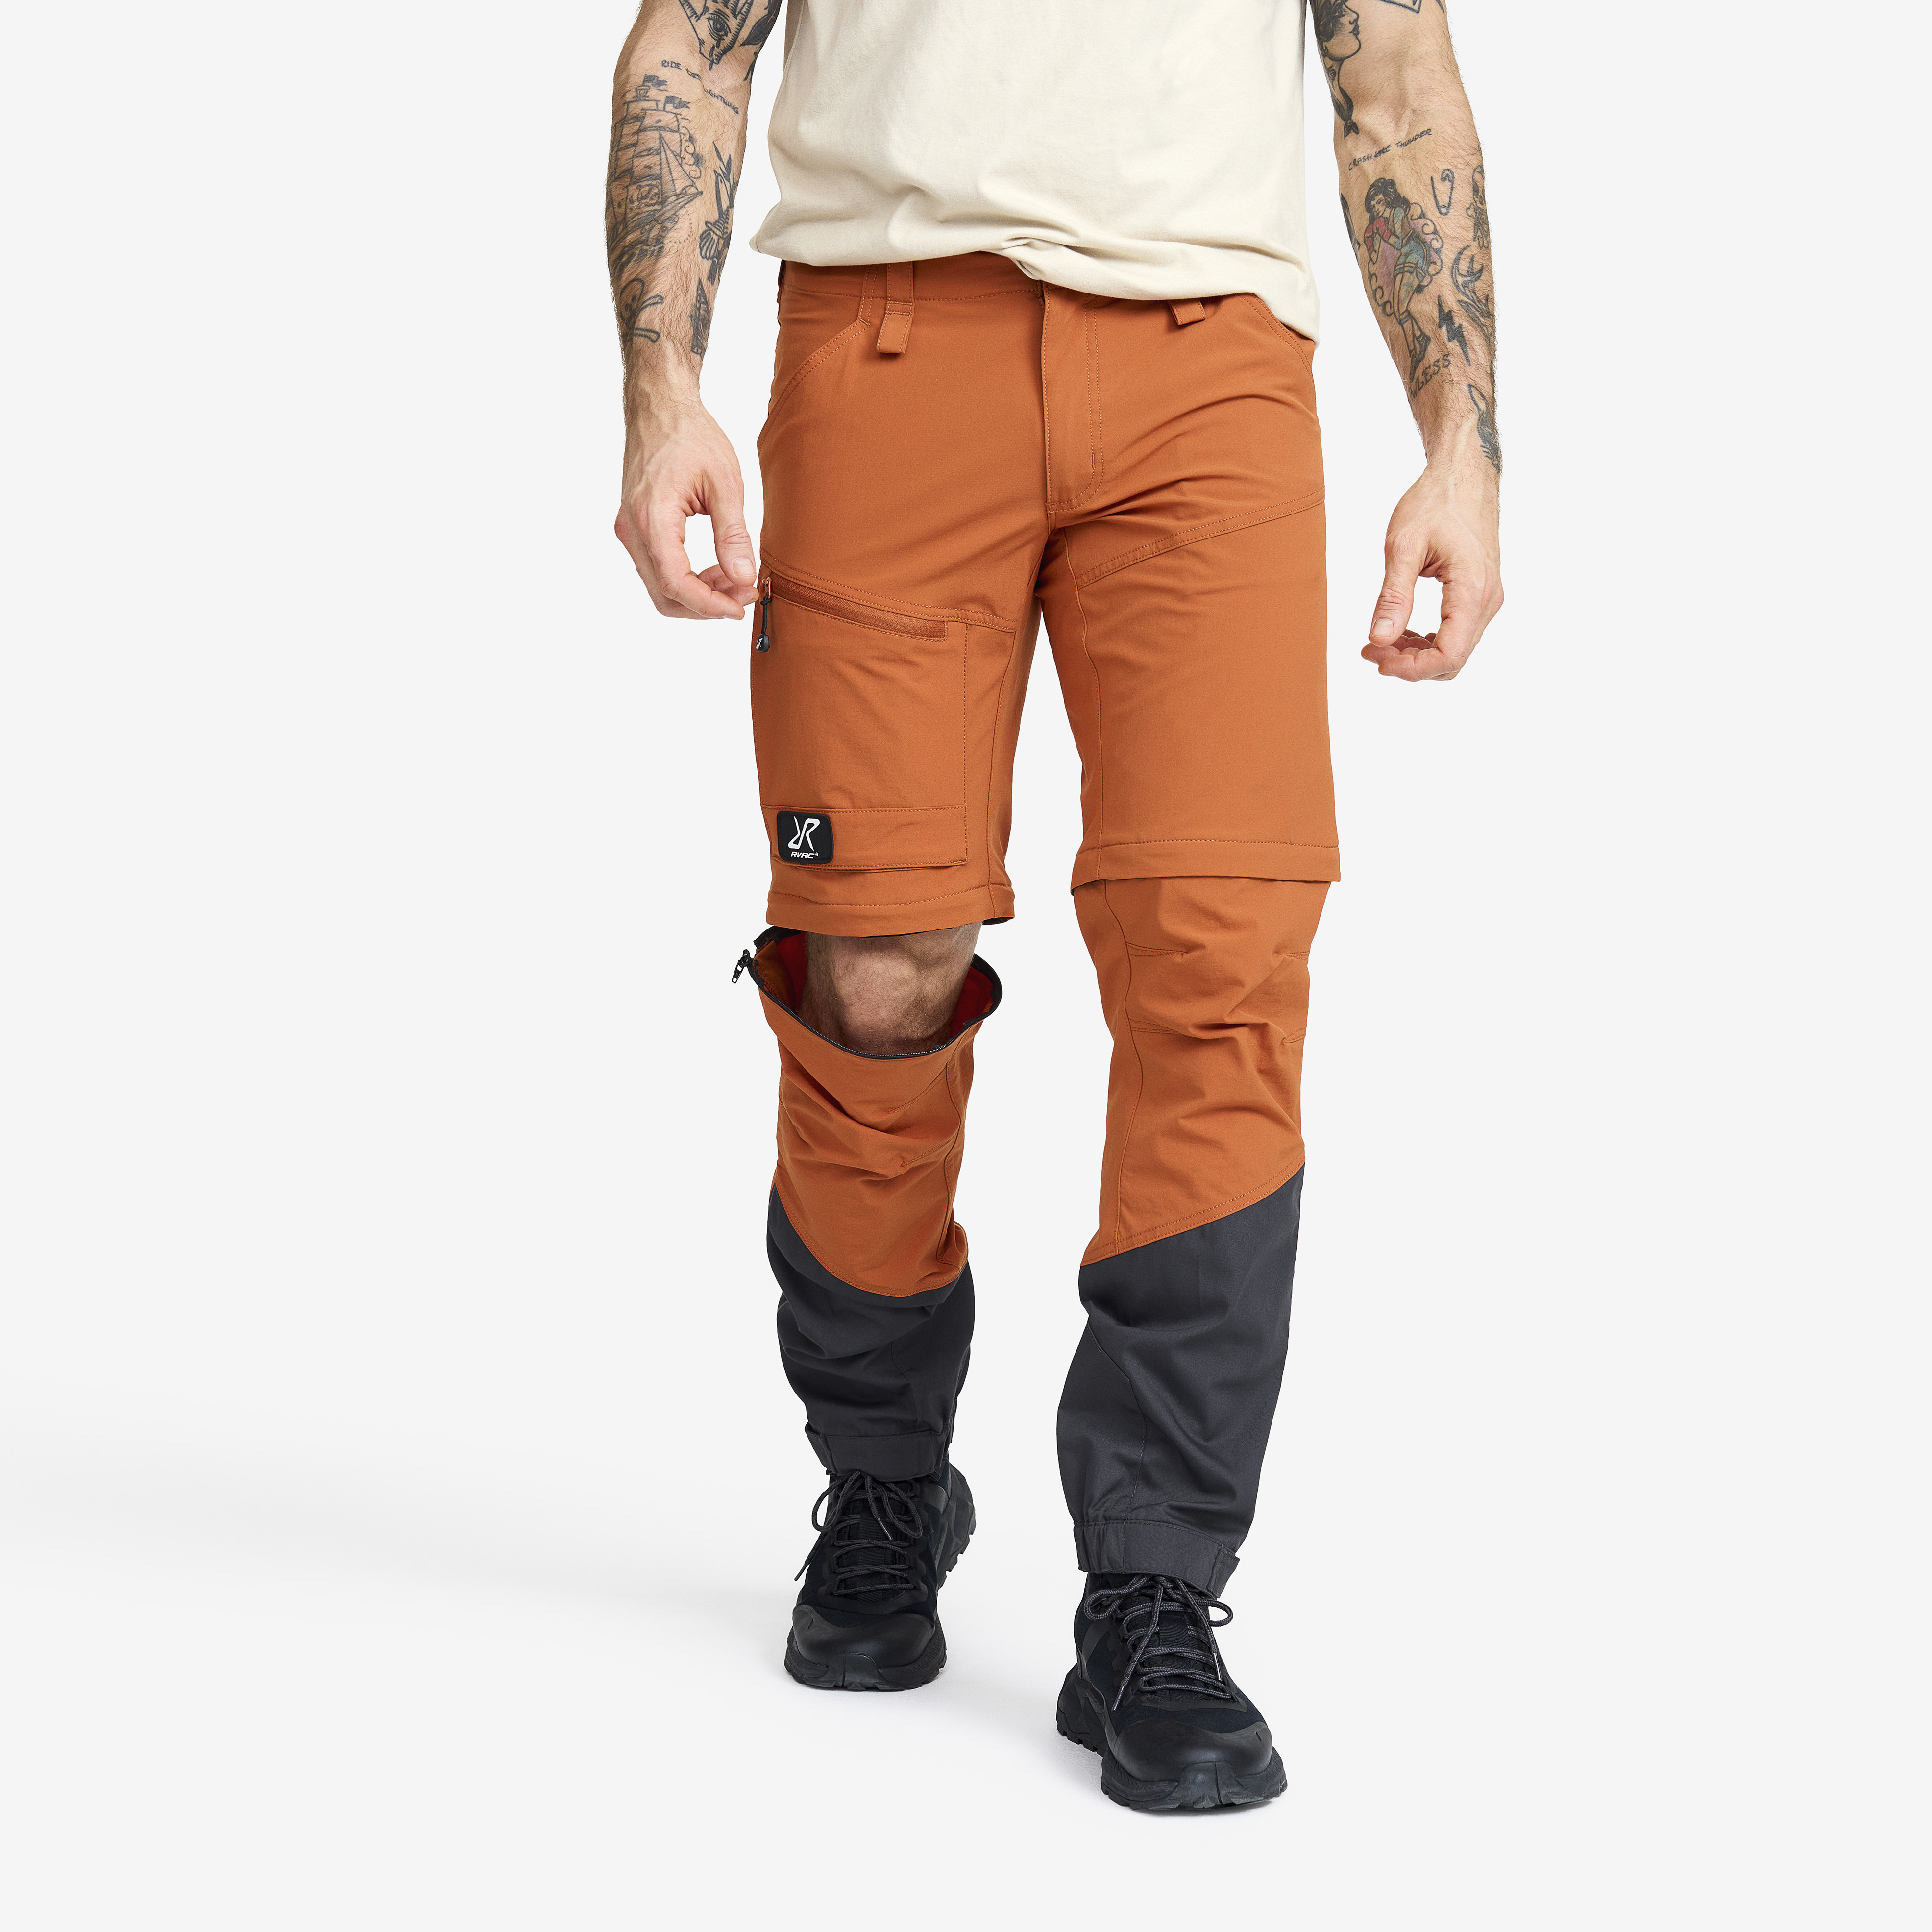 Range Pro Zip-off Pants Teracotta Brown/Anthracite Homme